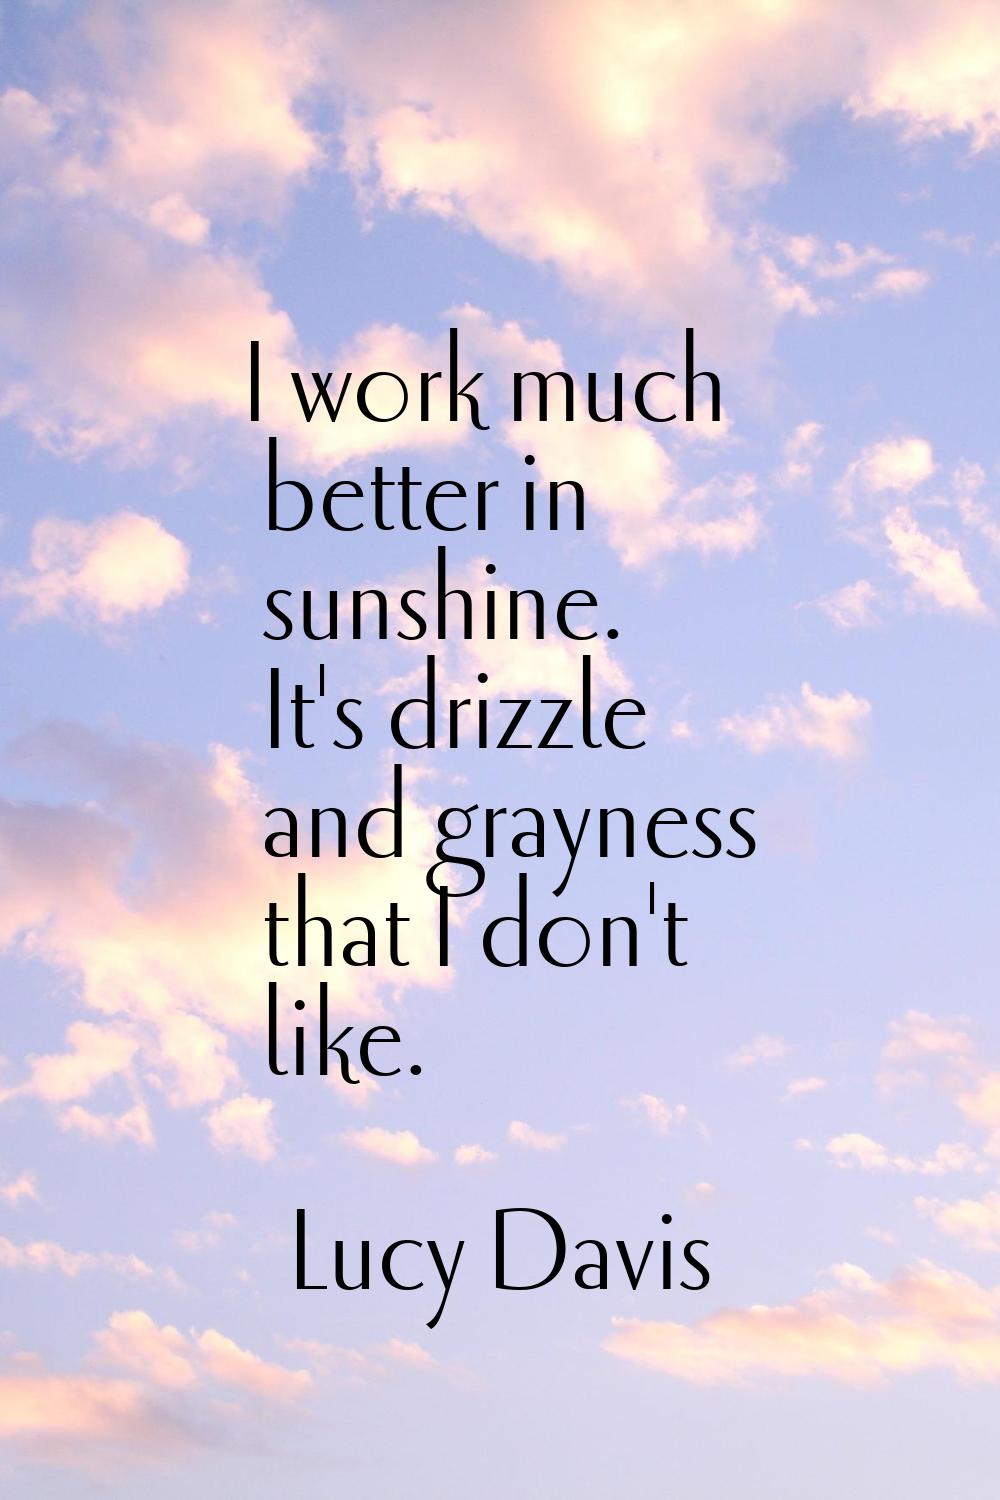 I work much better in sunshine. It's drizzle and grayness that I don't like.